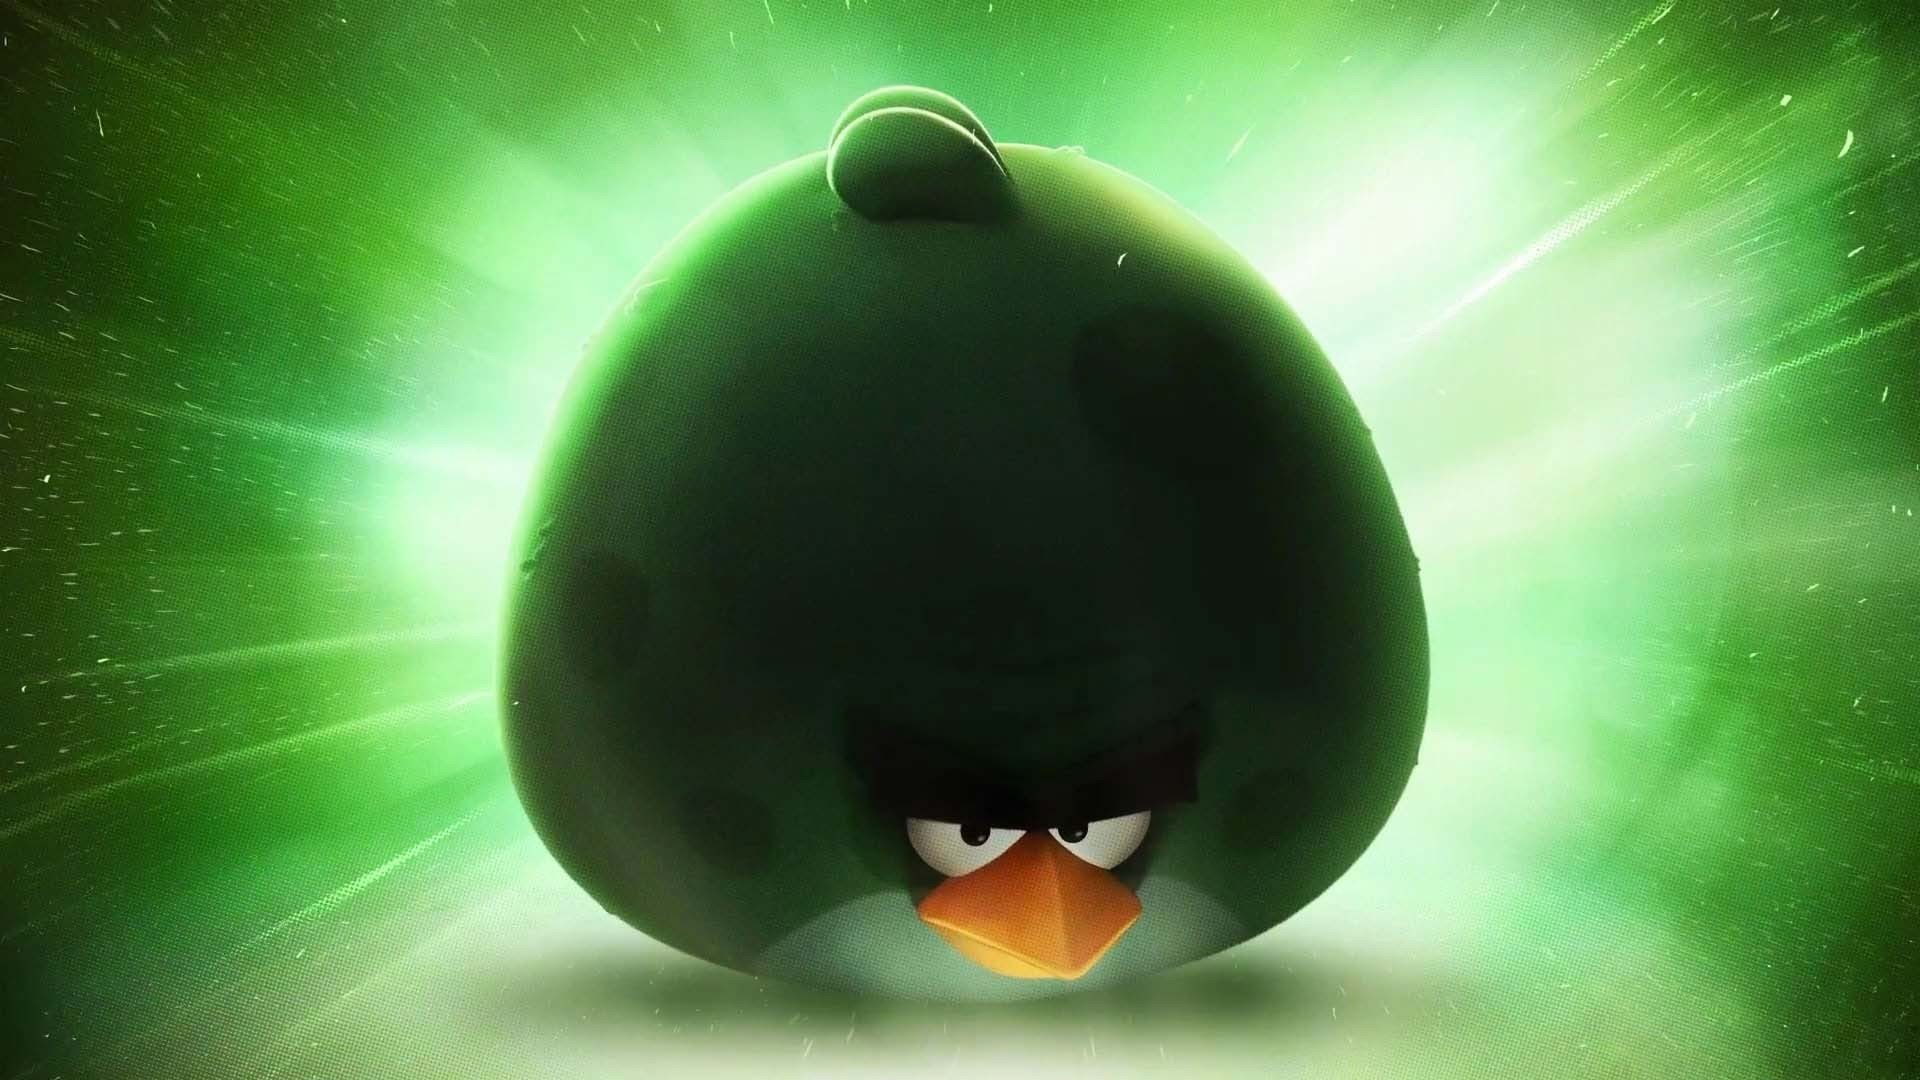 Angry Birds Game Wallpapers #14 - 1920x1080